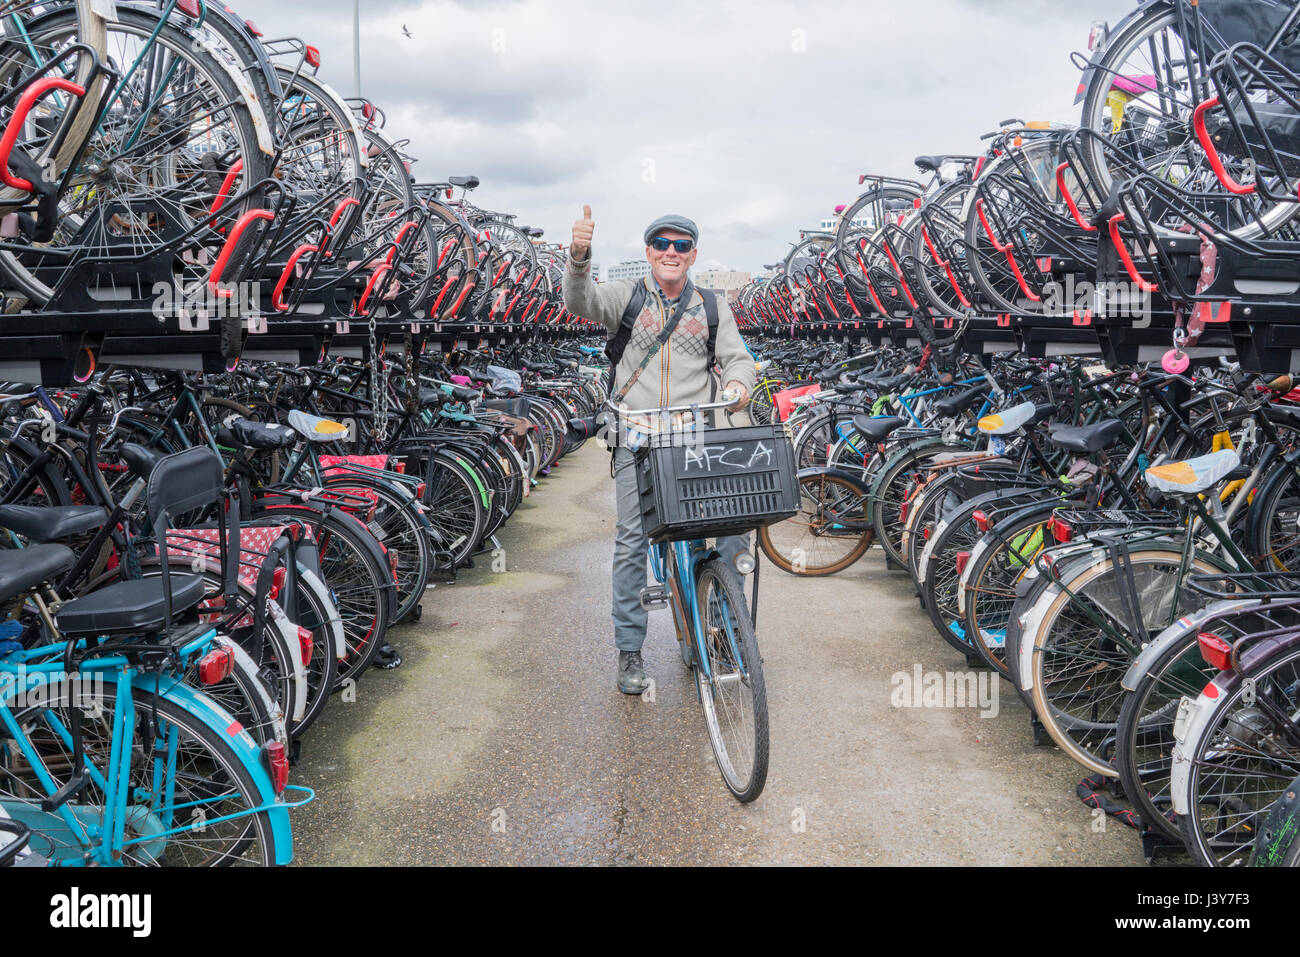 Cyclist on bicycle looking at camera giving thumbs up, Amsterdam, Netherlands Stock Photo